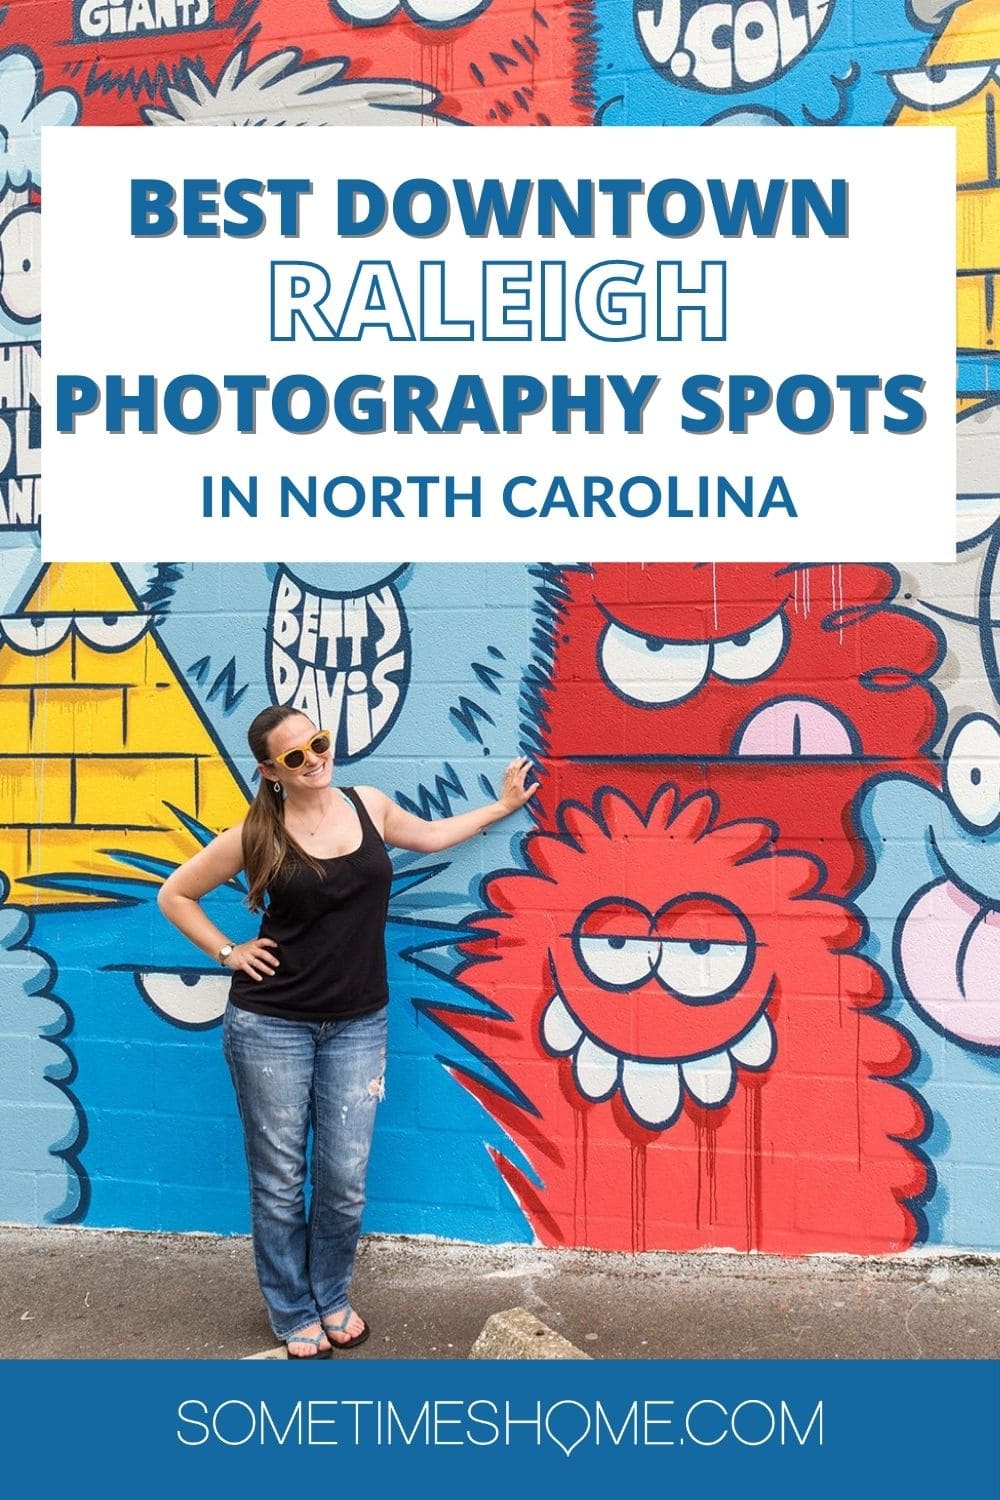 Pinterest image for the best downtown Raleigh photography spots in North Carolina with a colorful mural in the background.